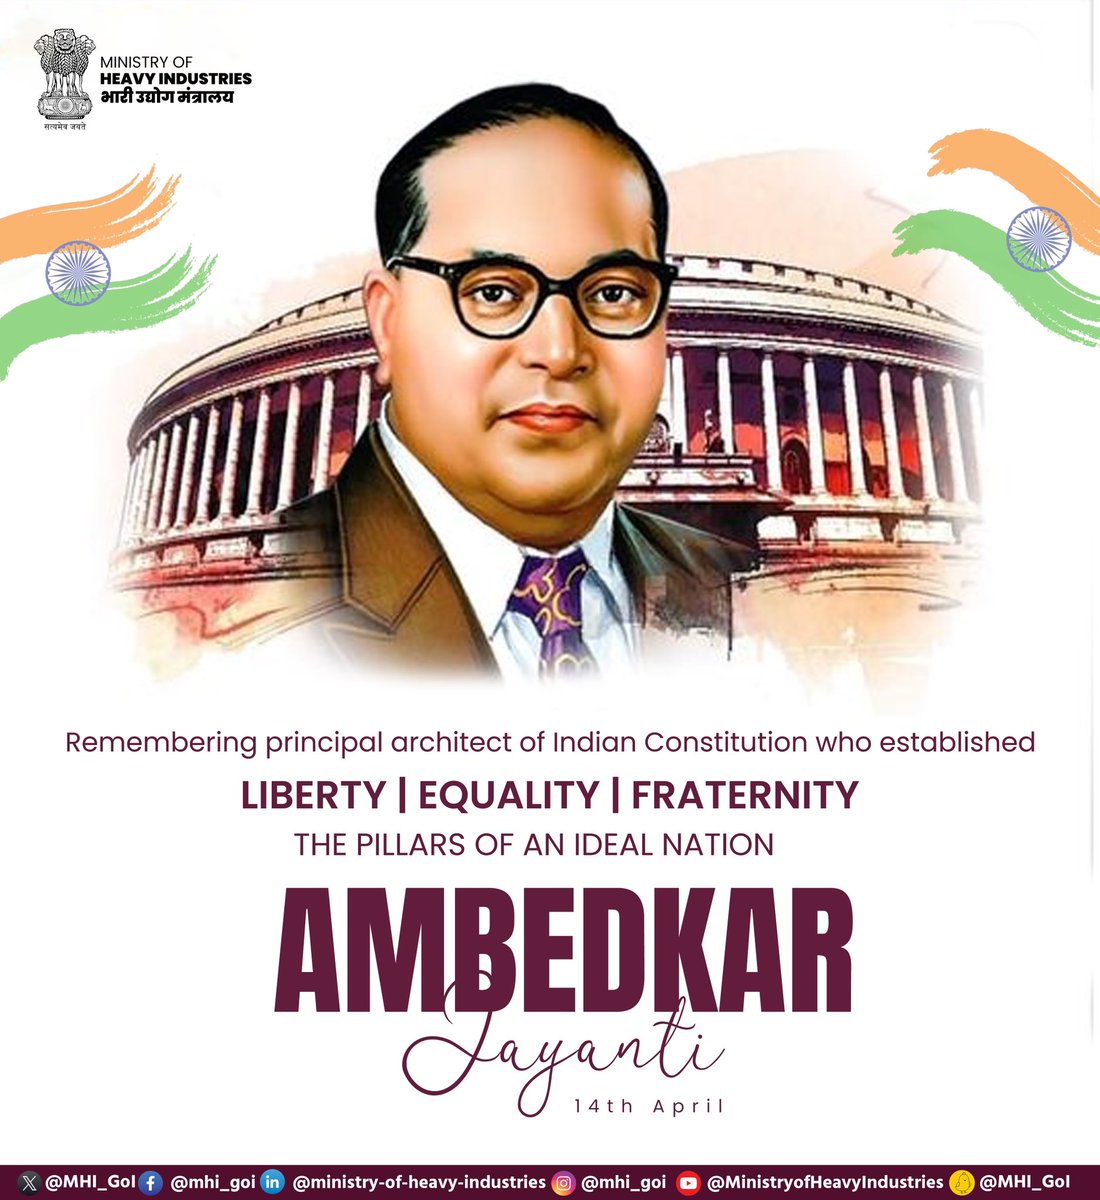 Remembering the visionary architect of our constitution, Dr. B R Ambedkar, on his birth anniversary. Let's uphold his legacy of social justice and equality for all. #AmbedkarJayanti #MHI